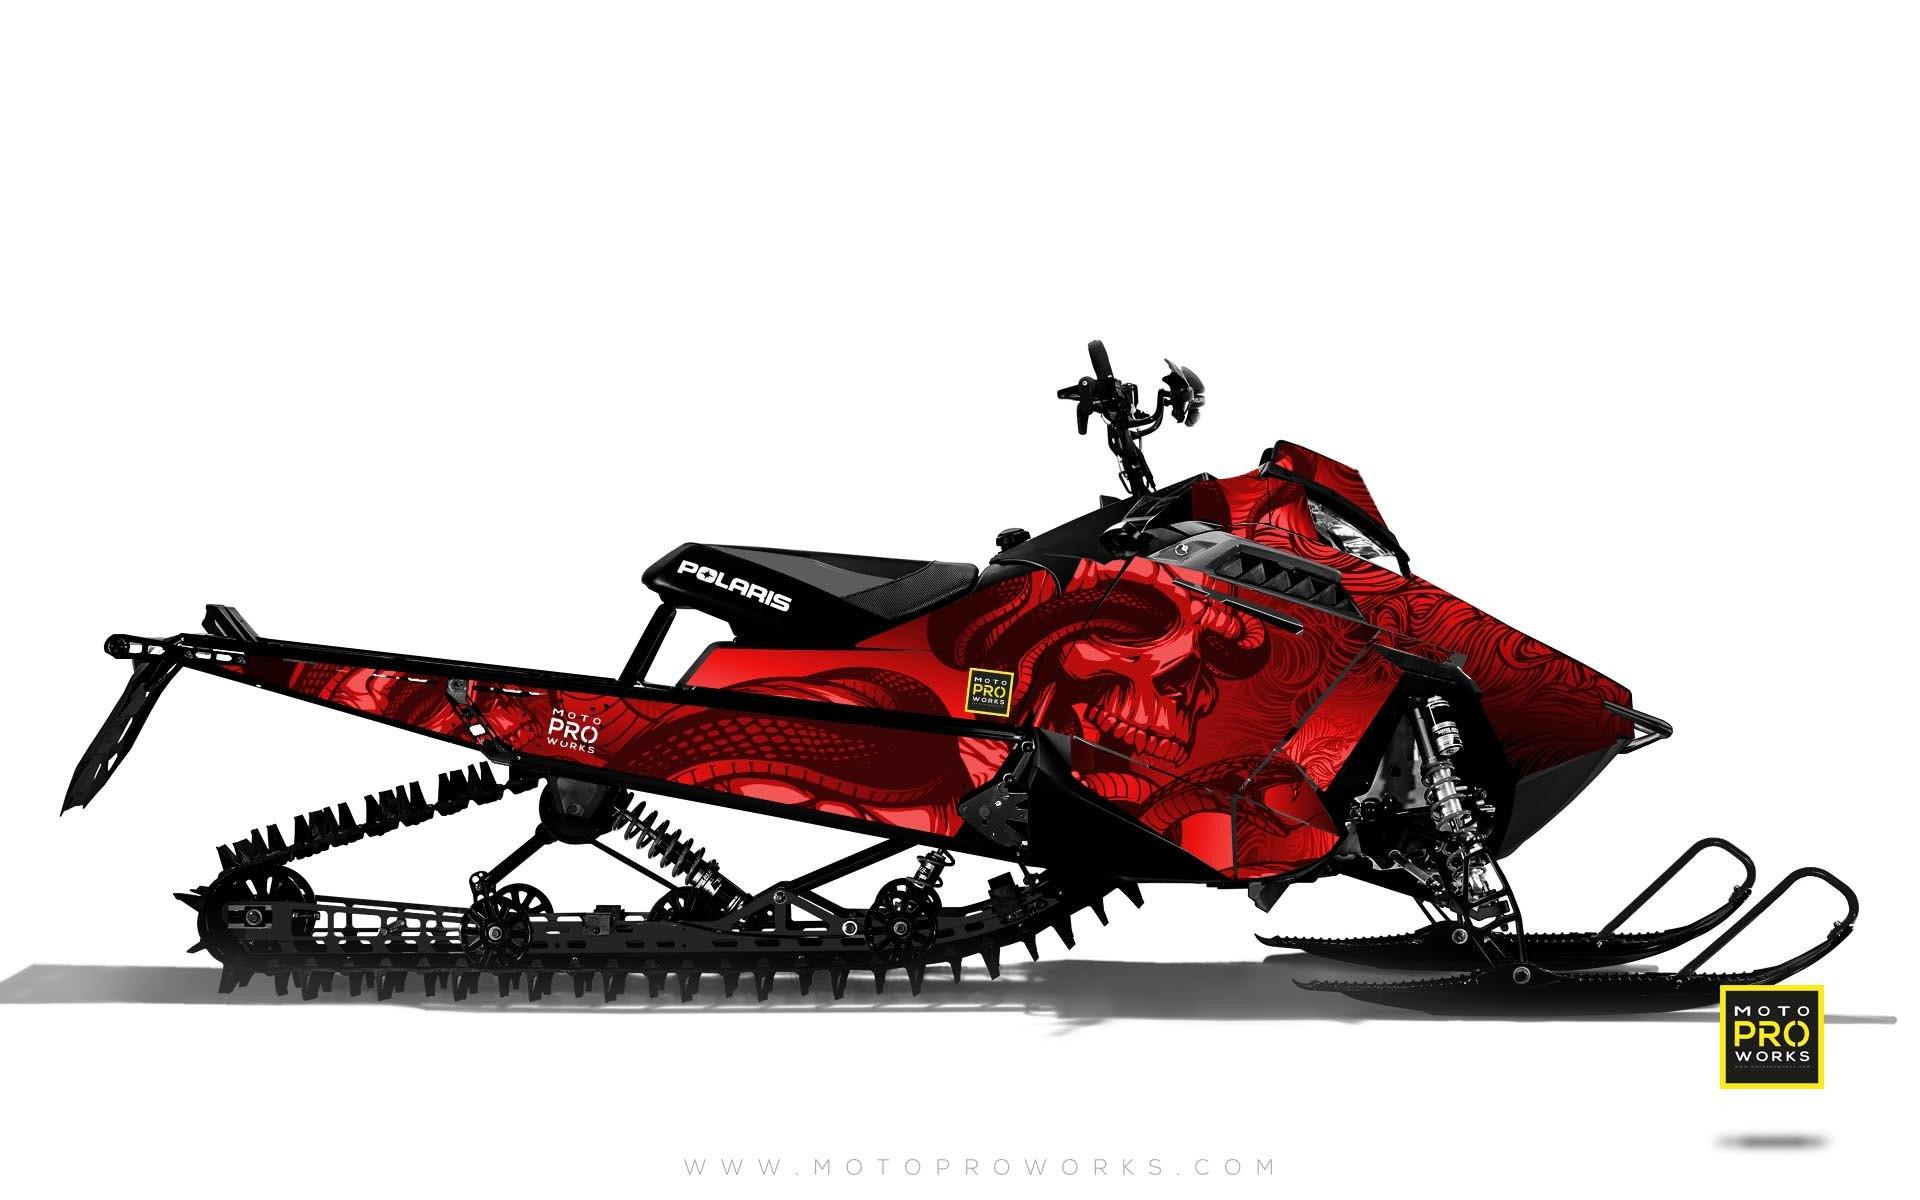 Polaris Graphics - "Ssskully" (red) - MotoProWorks | Decals and Bike Graphic kit